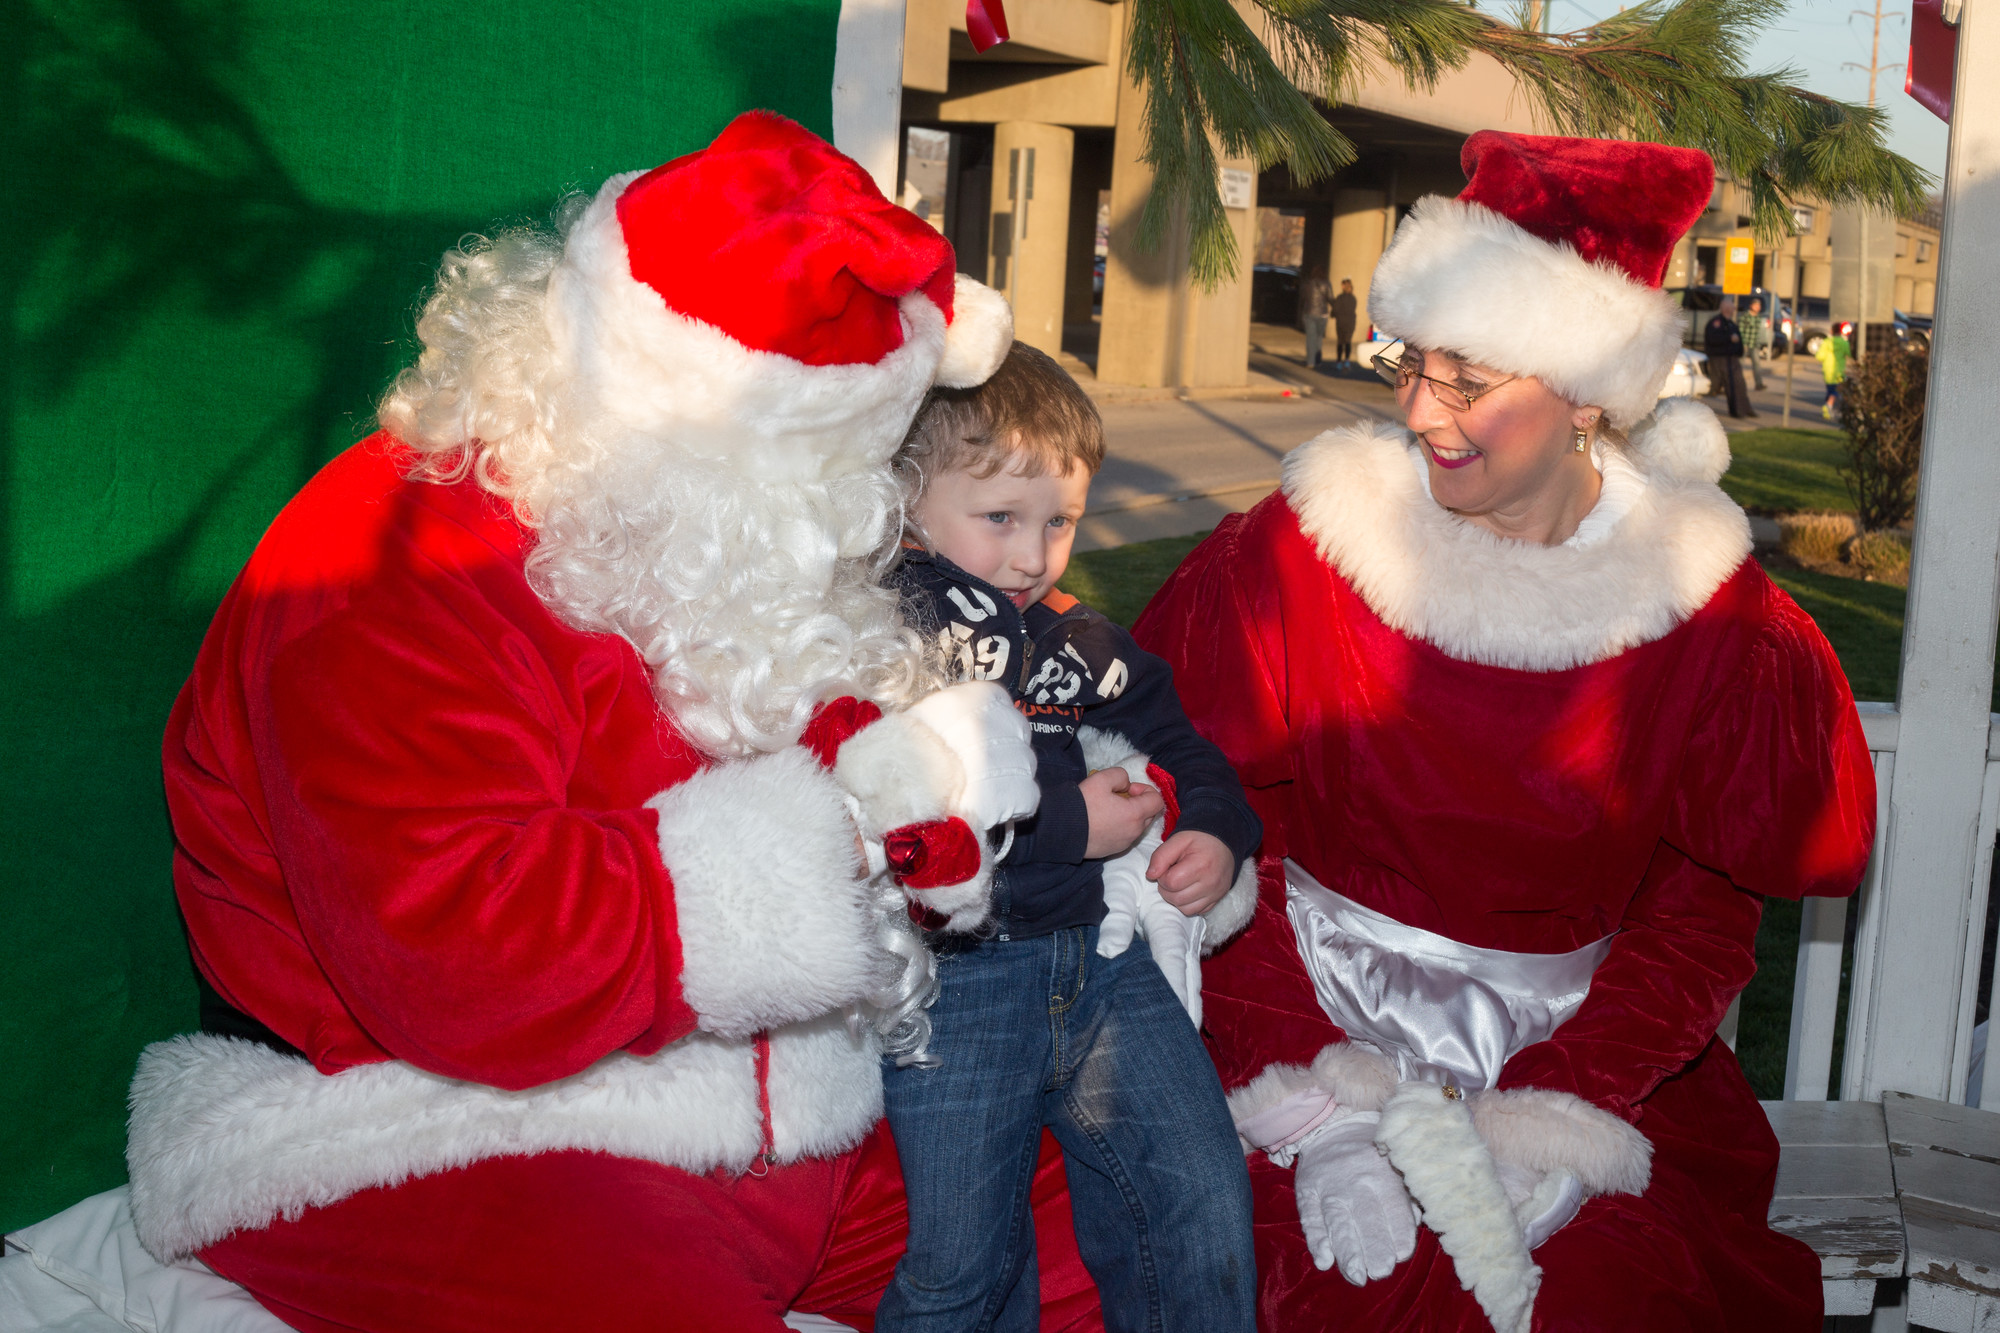 Jack Kearney, 4, met with Santa and Mrs. Clause at the Wantagh Chamber holiday lighting.